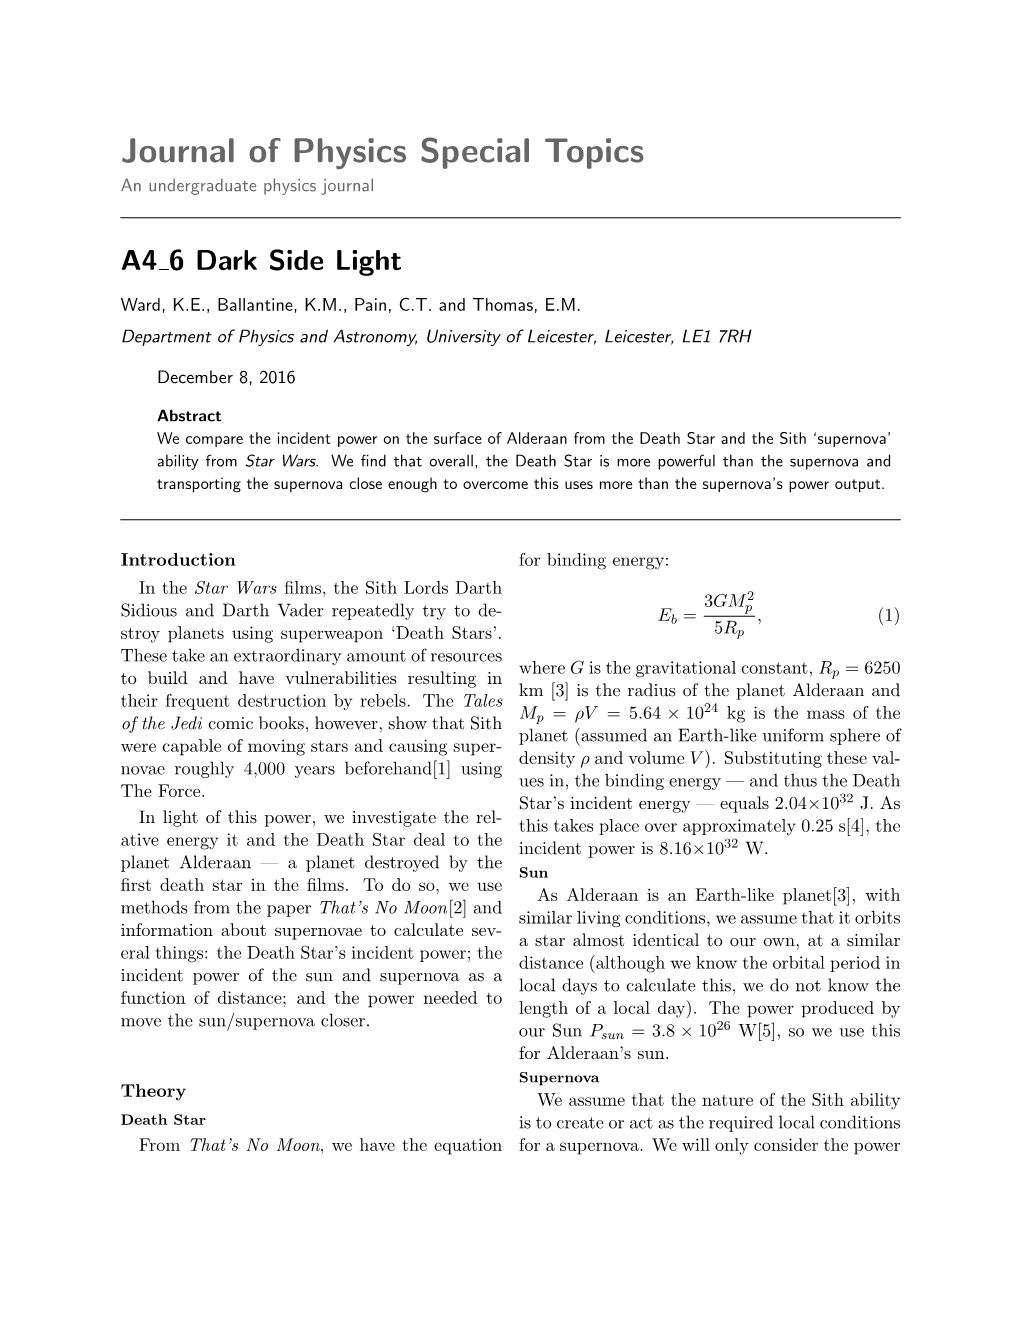 Journal of Physics Special Topics an Undergraduate Physics Journal